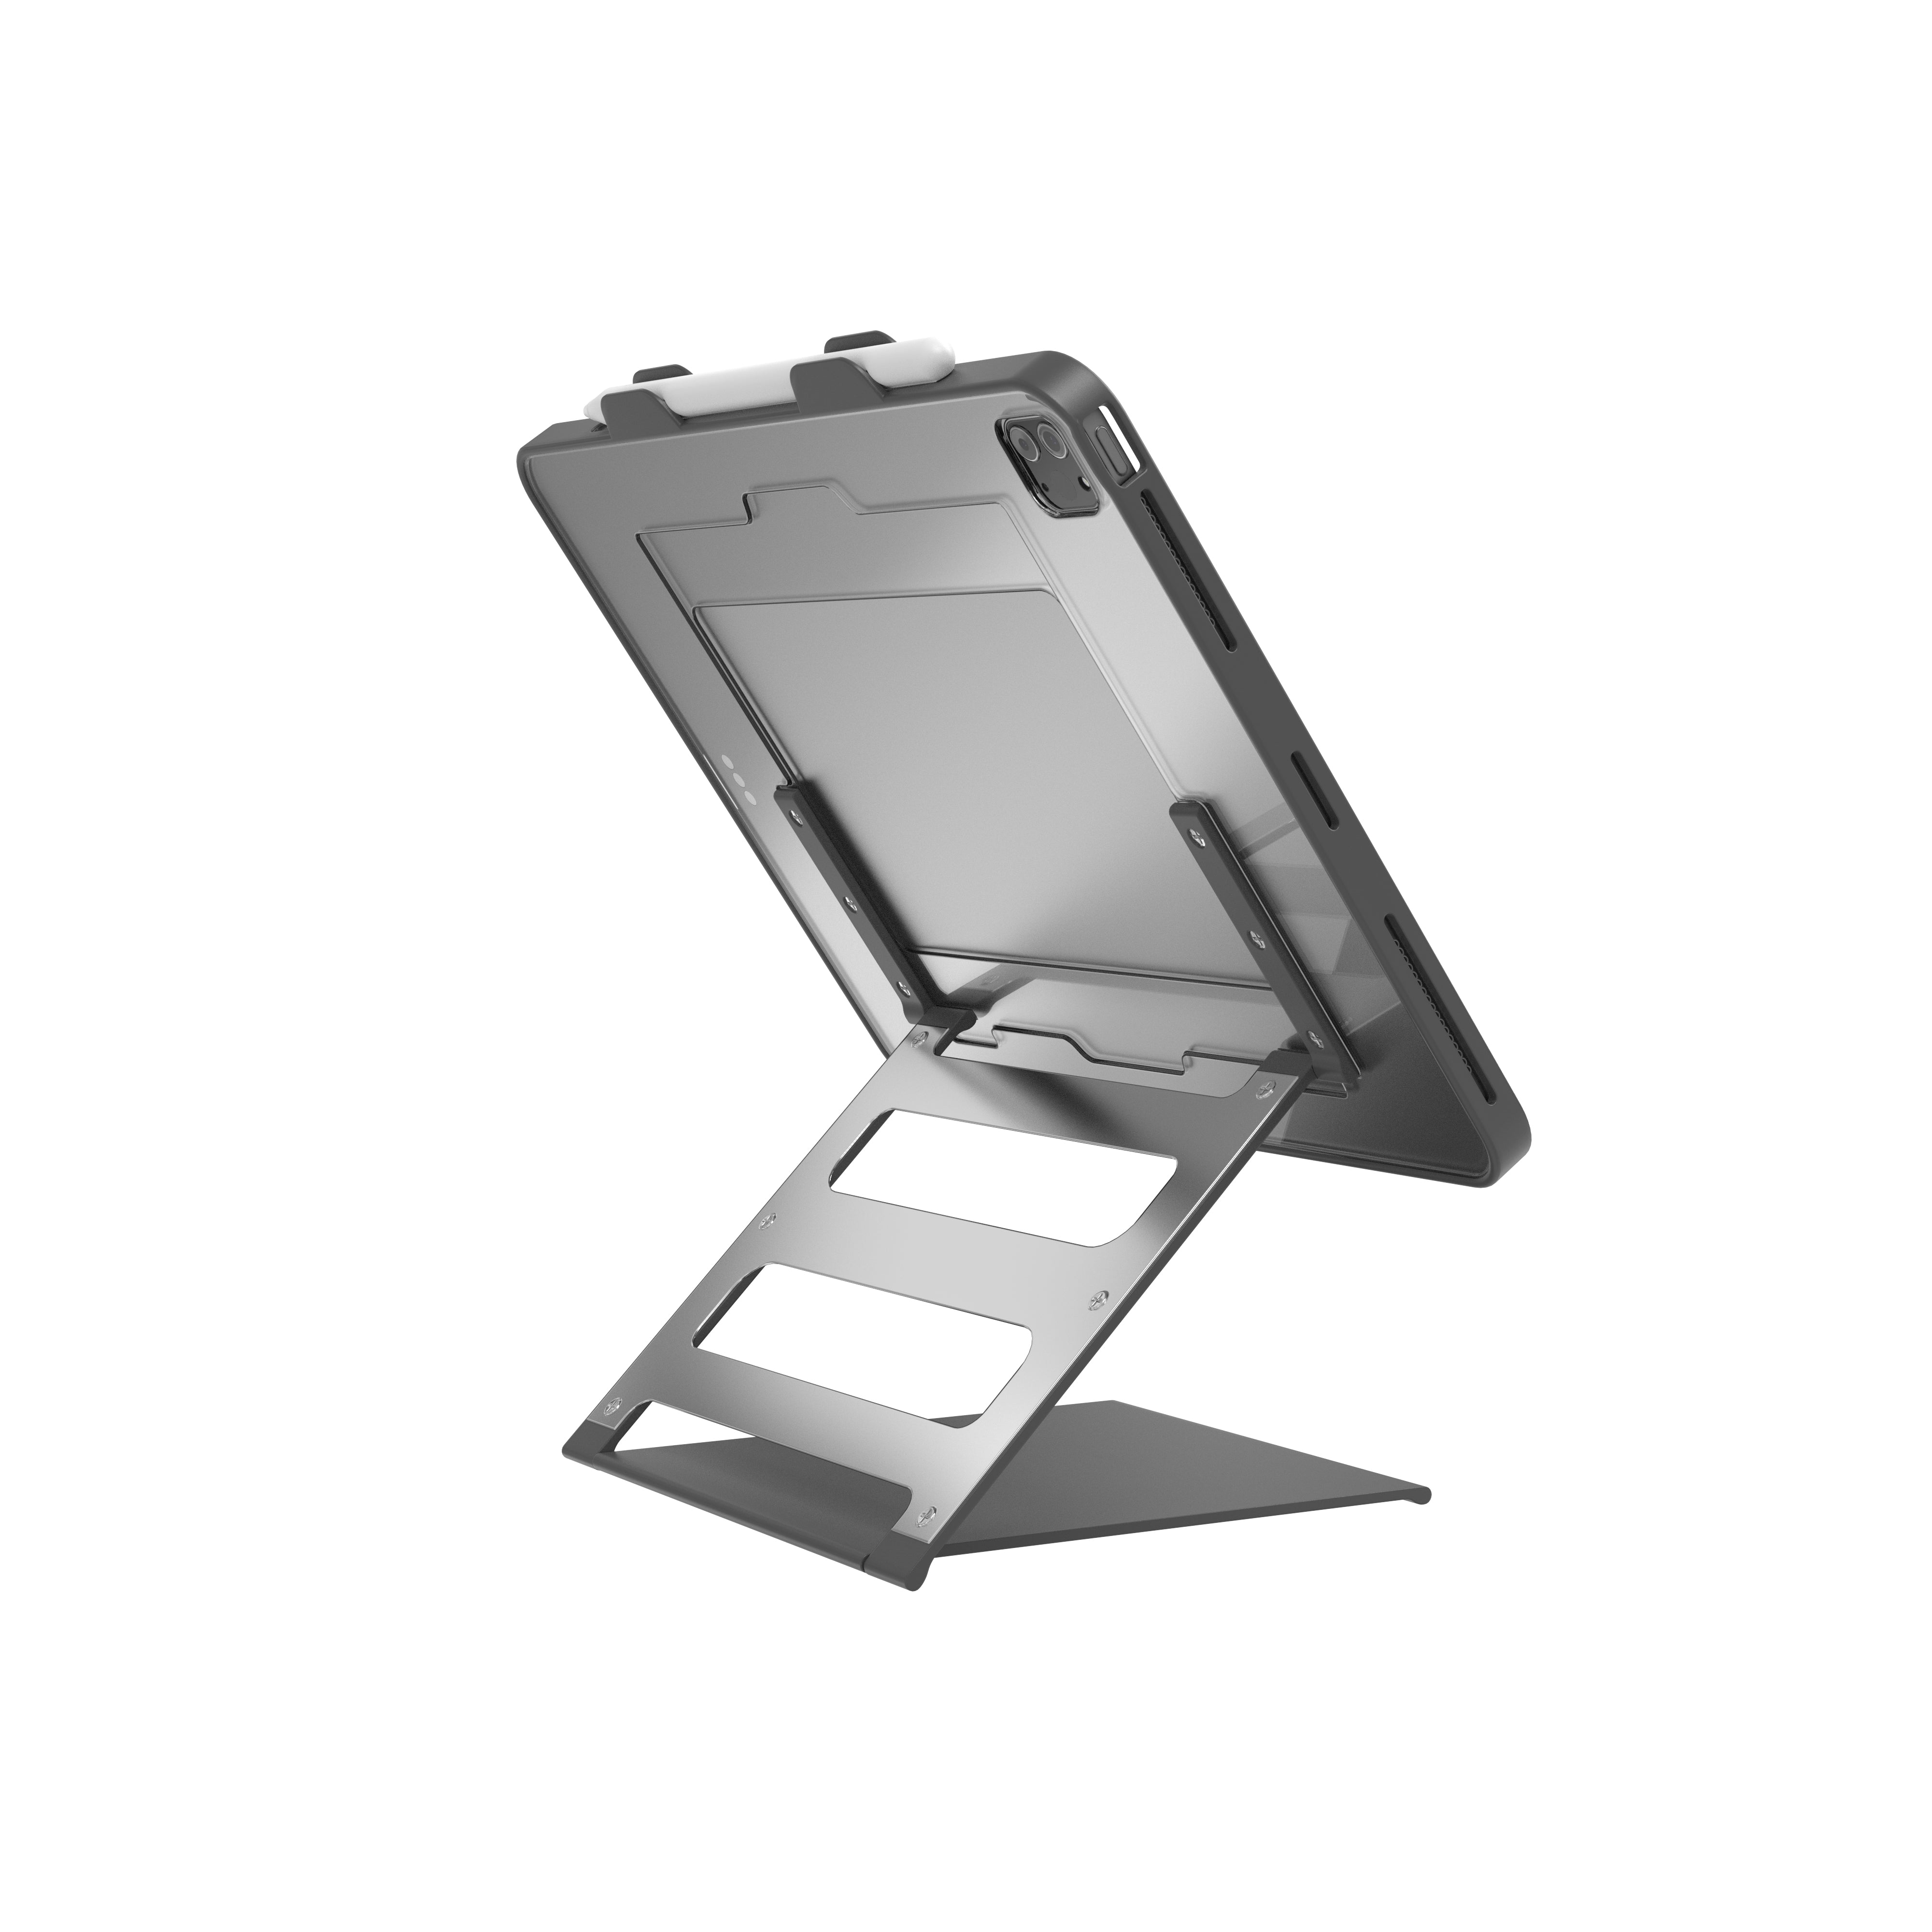 Tablet Carrying Case for iPad Pro 11” with Kickstand